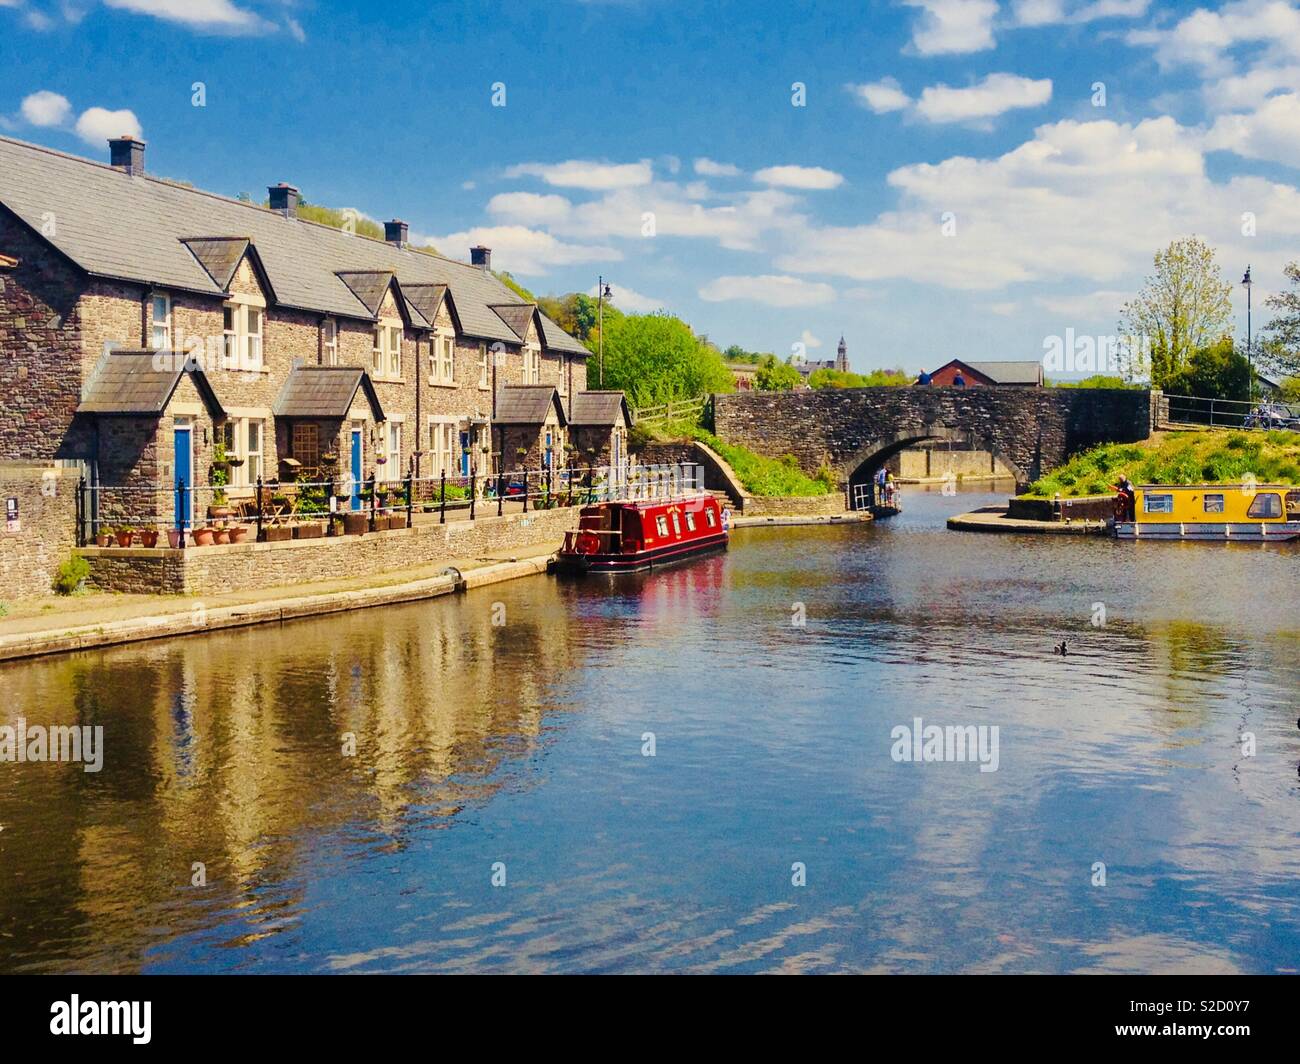 River boat by cottages Stock Photo